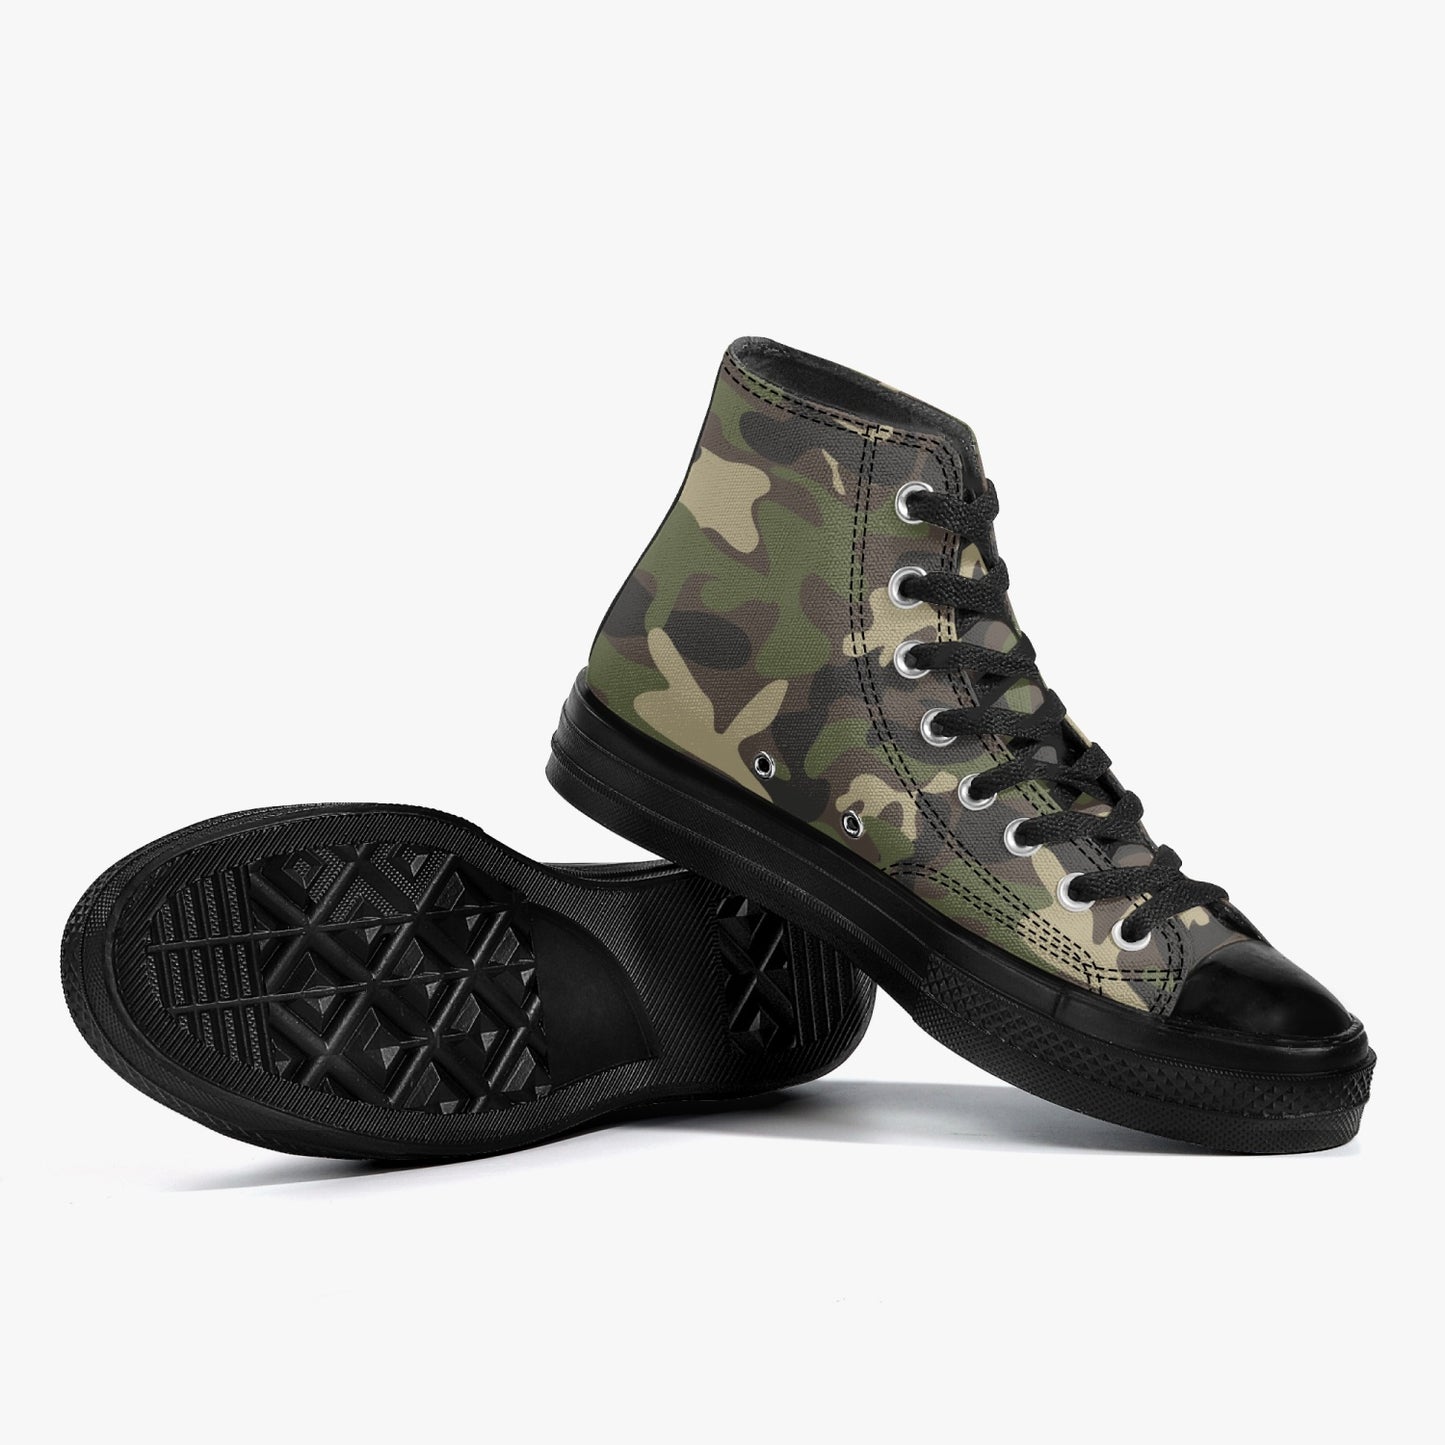 Camo High Top Shoes, Green Camouflage Black Lace Up Sneakers Footwear Rave Canvas Streatwear Designer Men Women Gift Idea Starcove Fashion